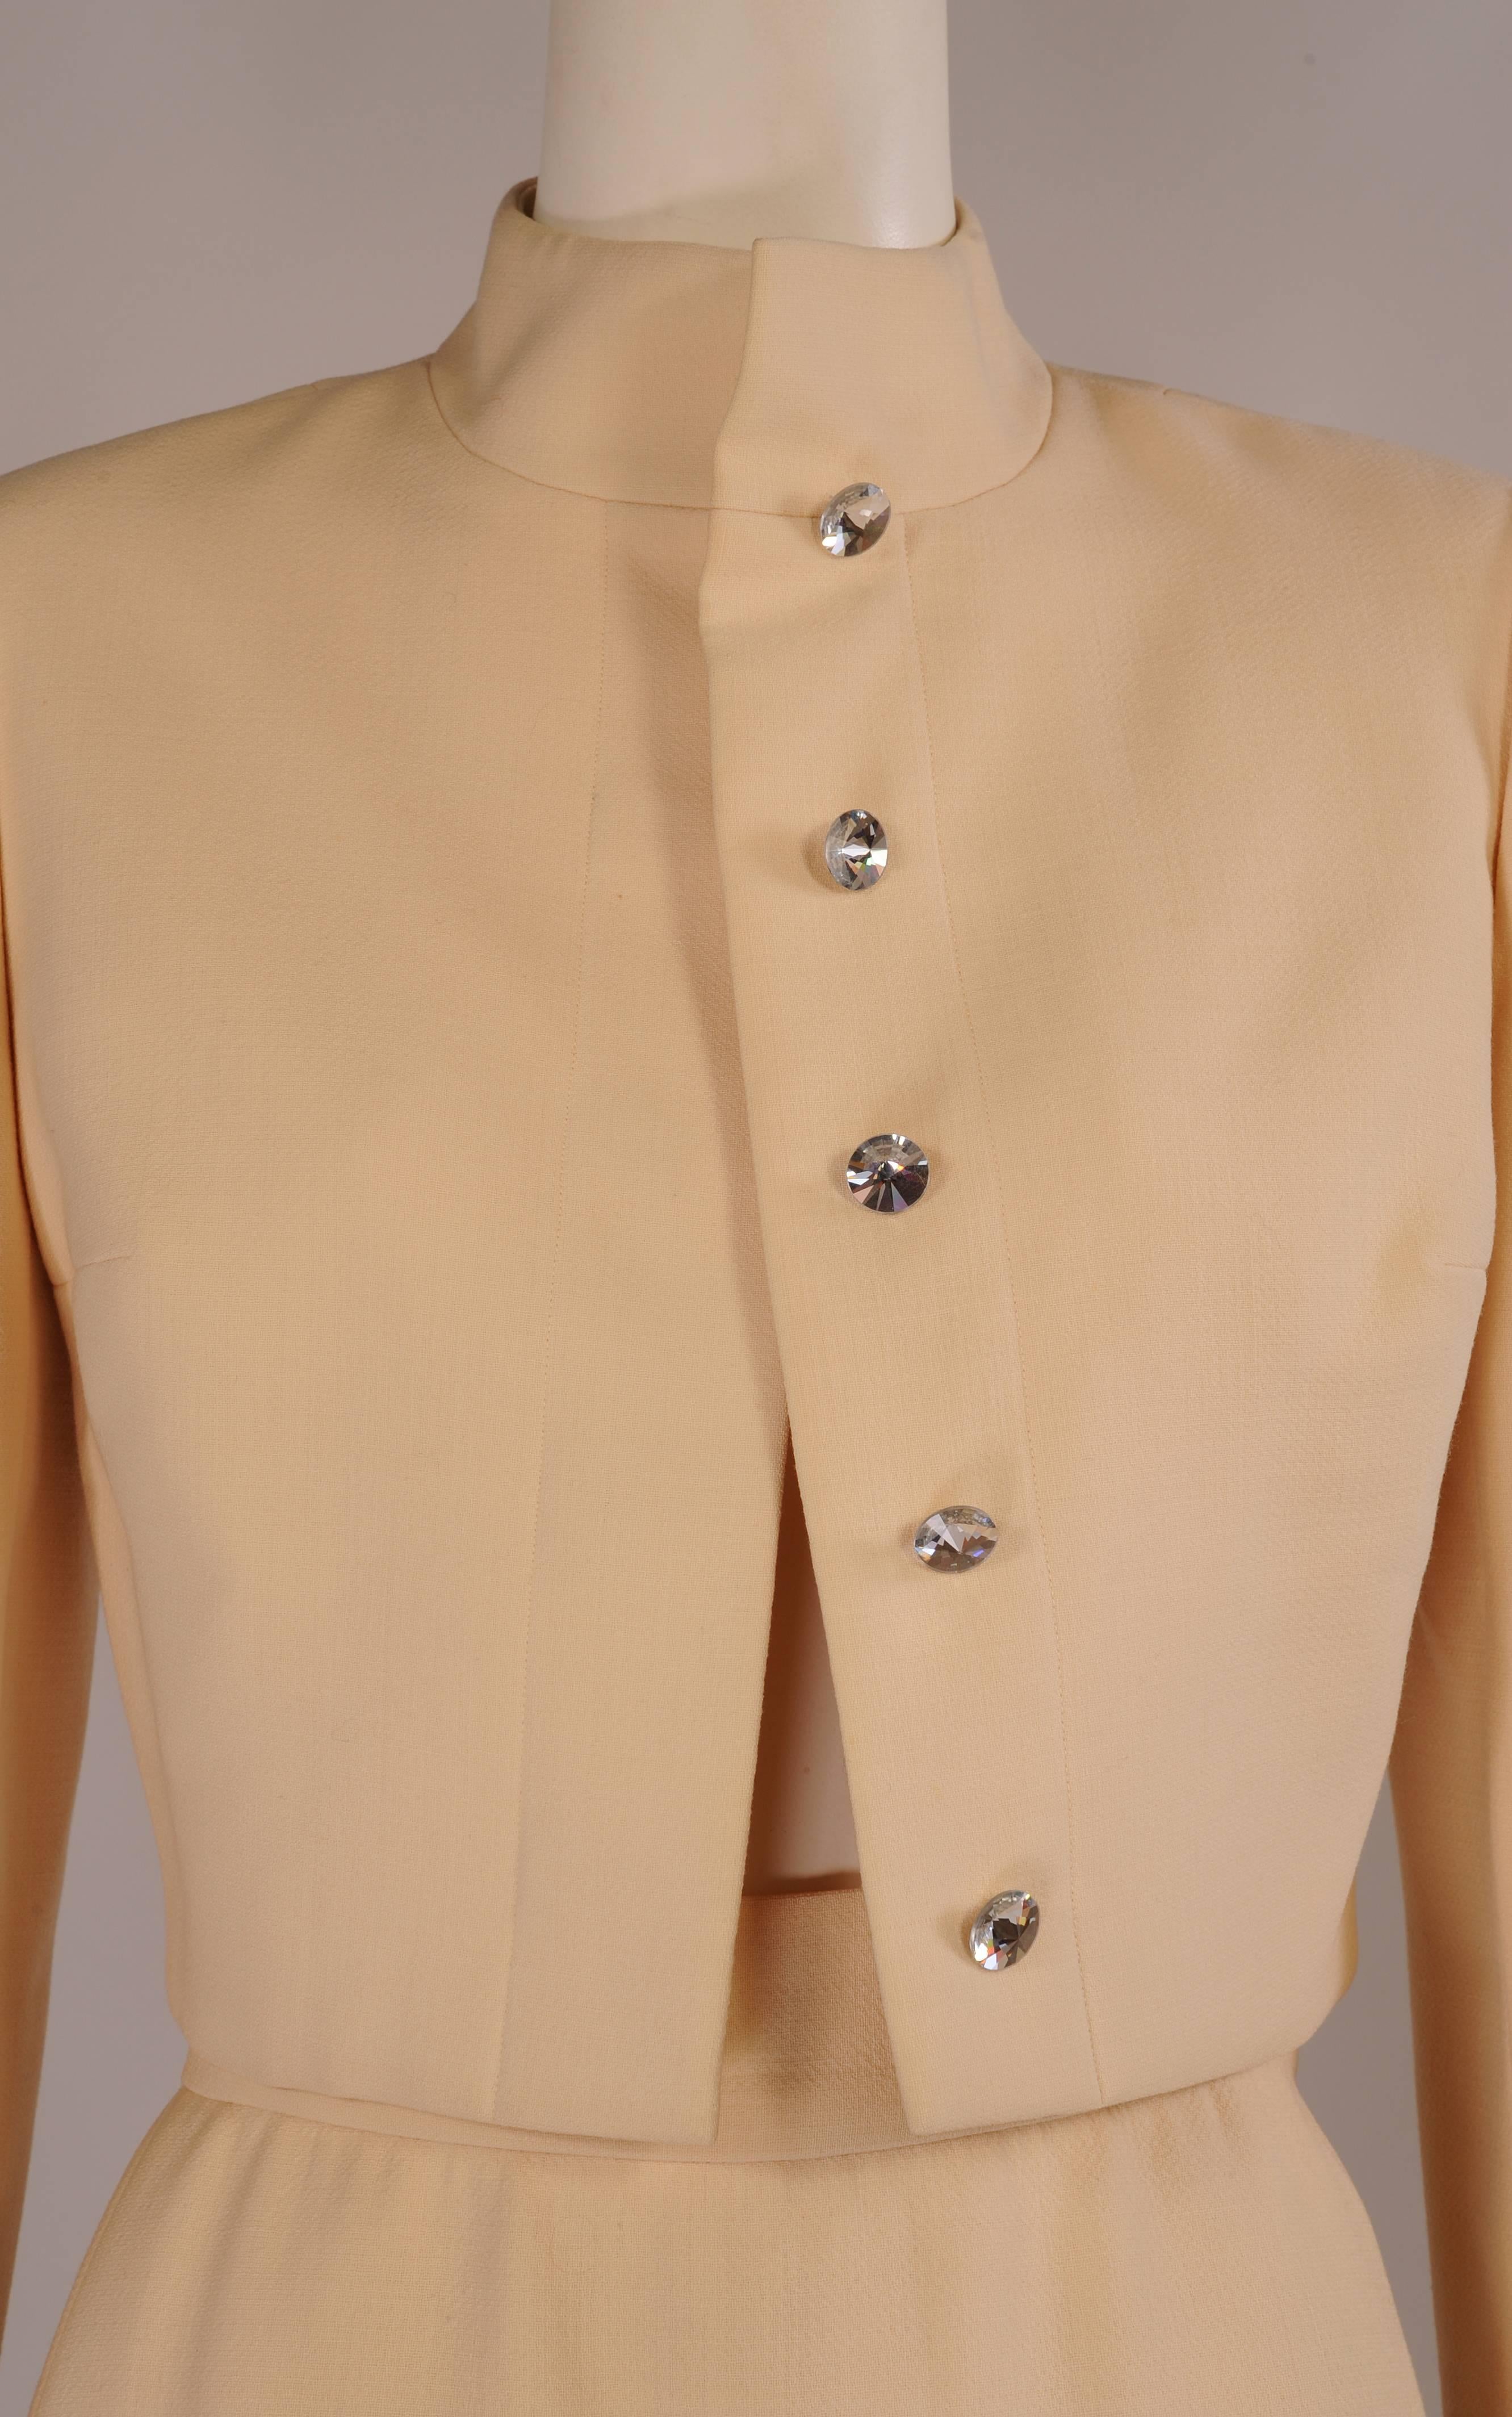 Chic and elegant, this cream wool crepe evening suit from Pauline Trigere has just the right amount of ornamentation.
The waist length jacket has a stand up collar and five large jeweled buttons for closure as well as one on each cuff. The matching